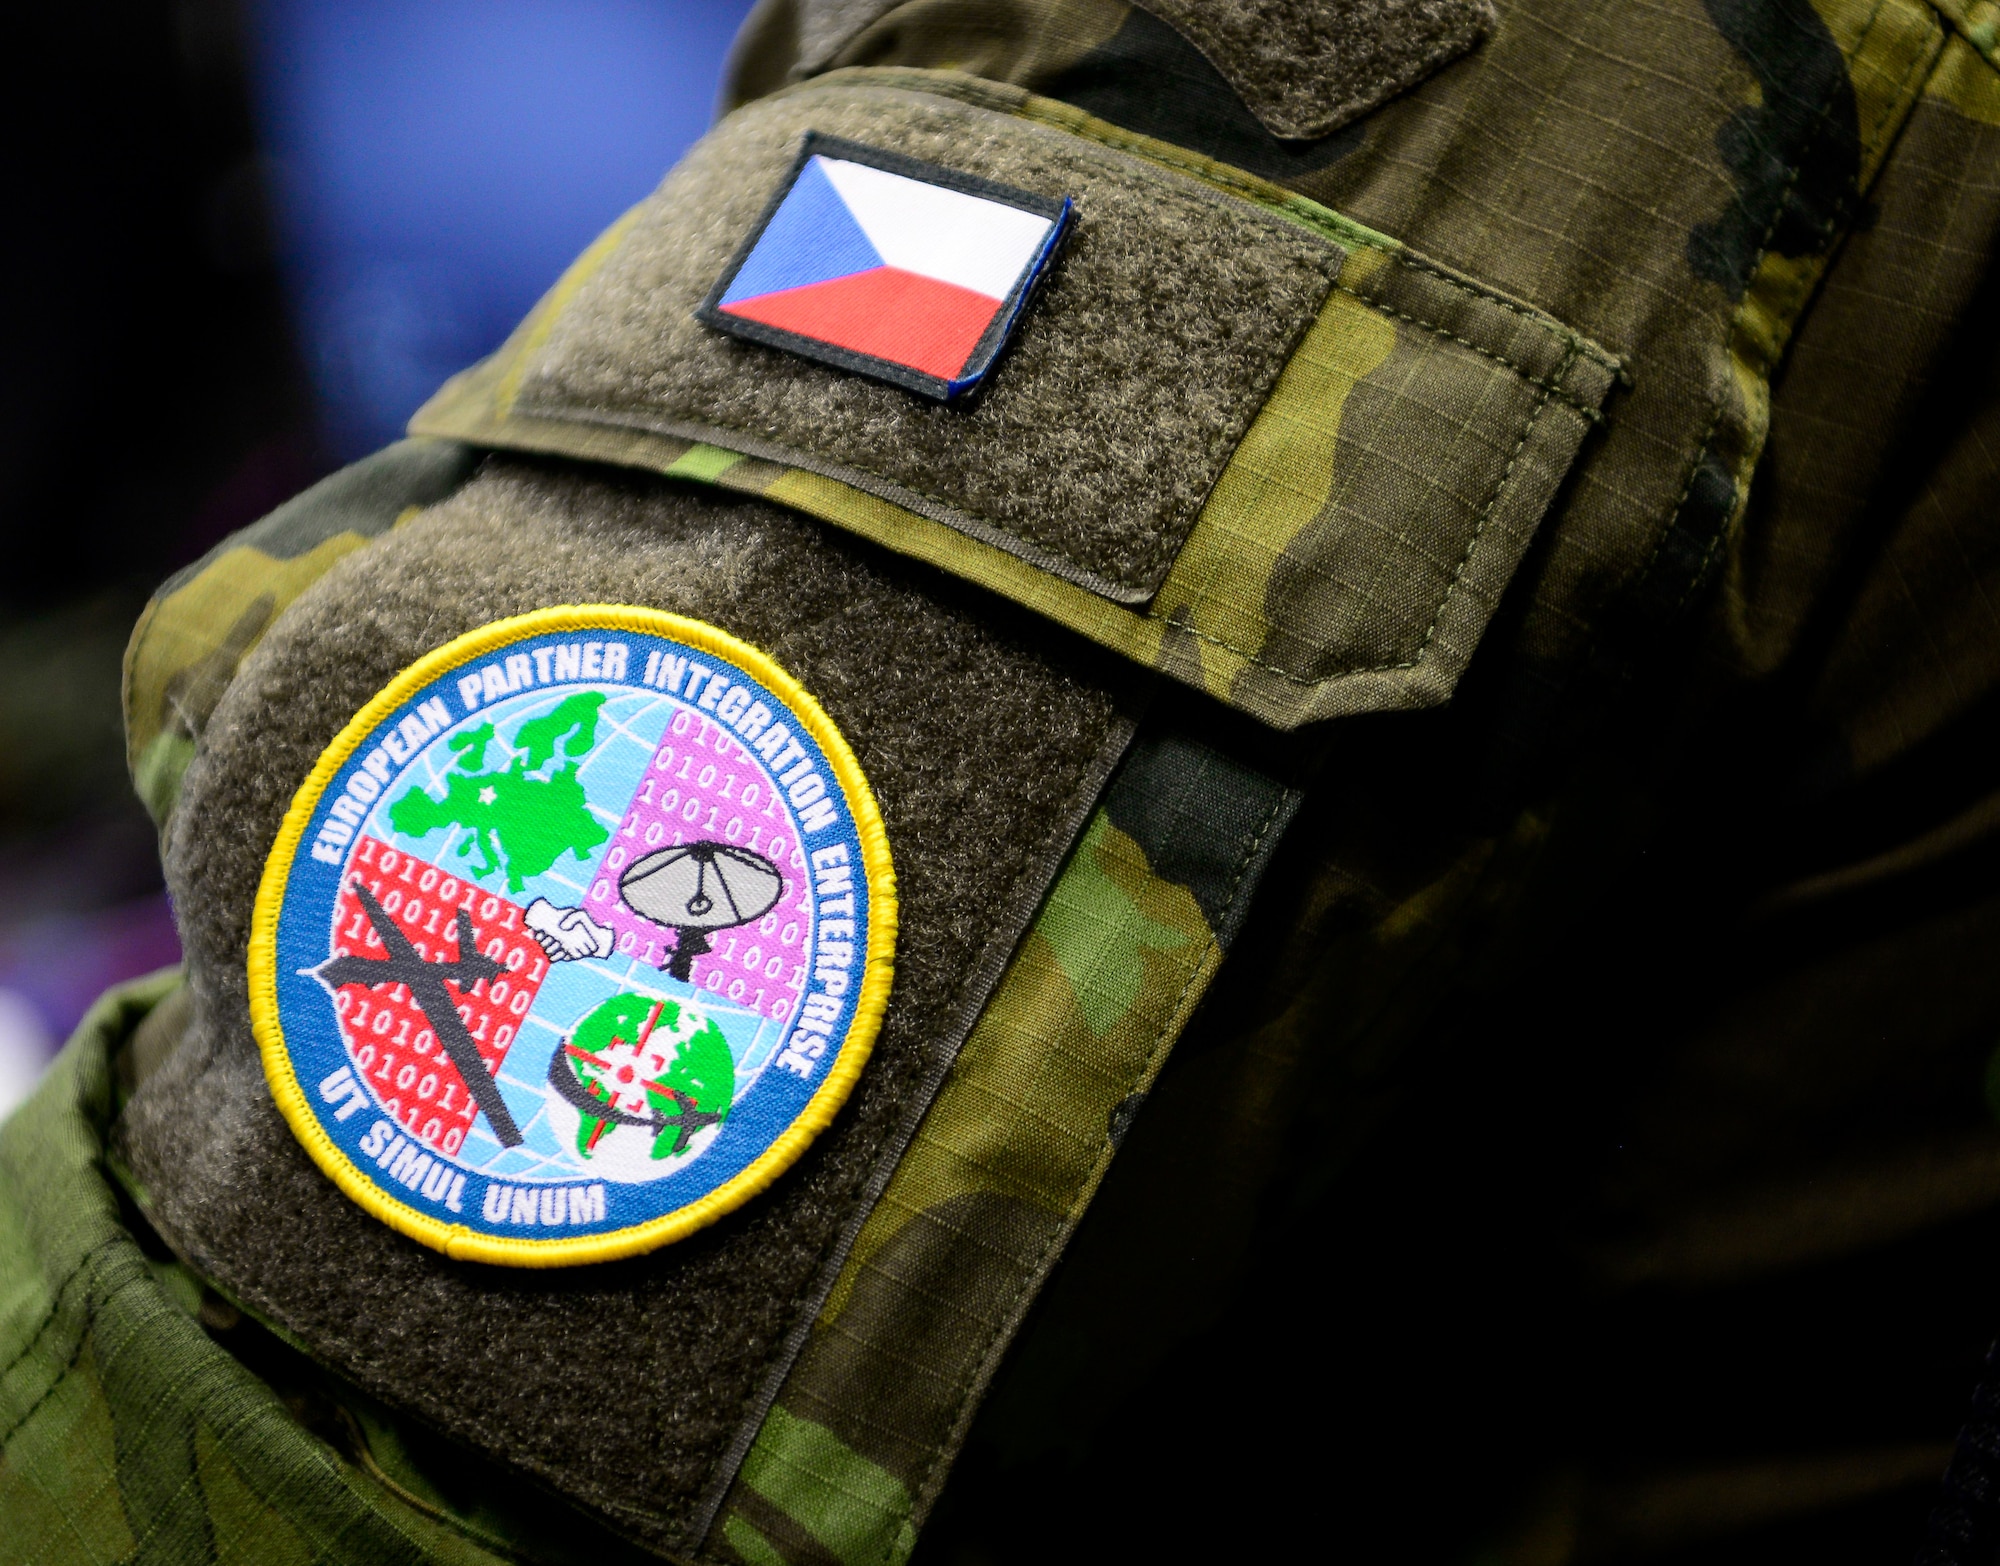 A Czech Republic airman wears a European Partnership Integration Enterprise patch during exercise Unified Vision 2023 at Ramstein Air Base, Germany, June 22, 2023. Exercises like Unified Vision 23 provide an opportunity for NATO forces to familiarize themselves with other nations’ practices in order to continue delivering air and space power for the betterment of all allies and partners.